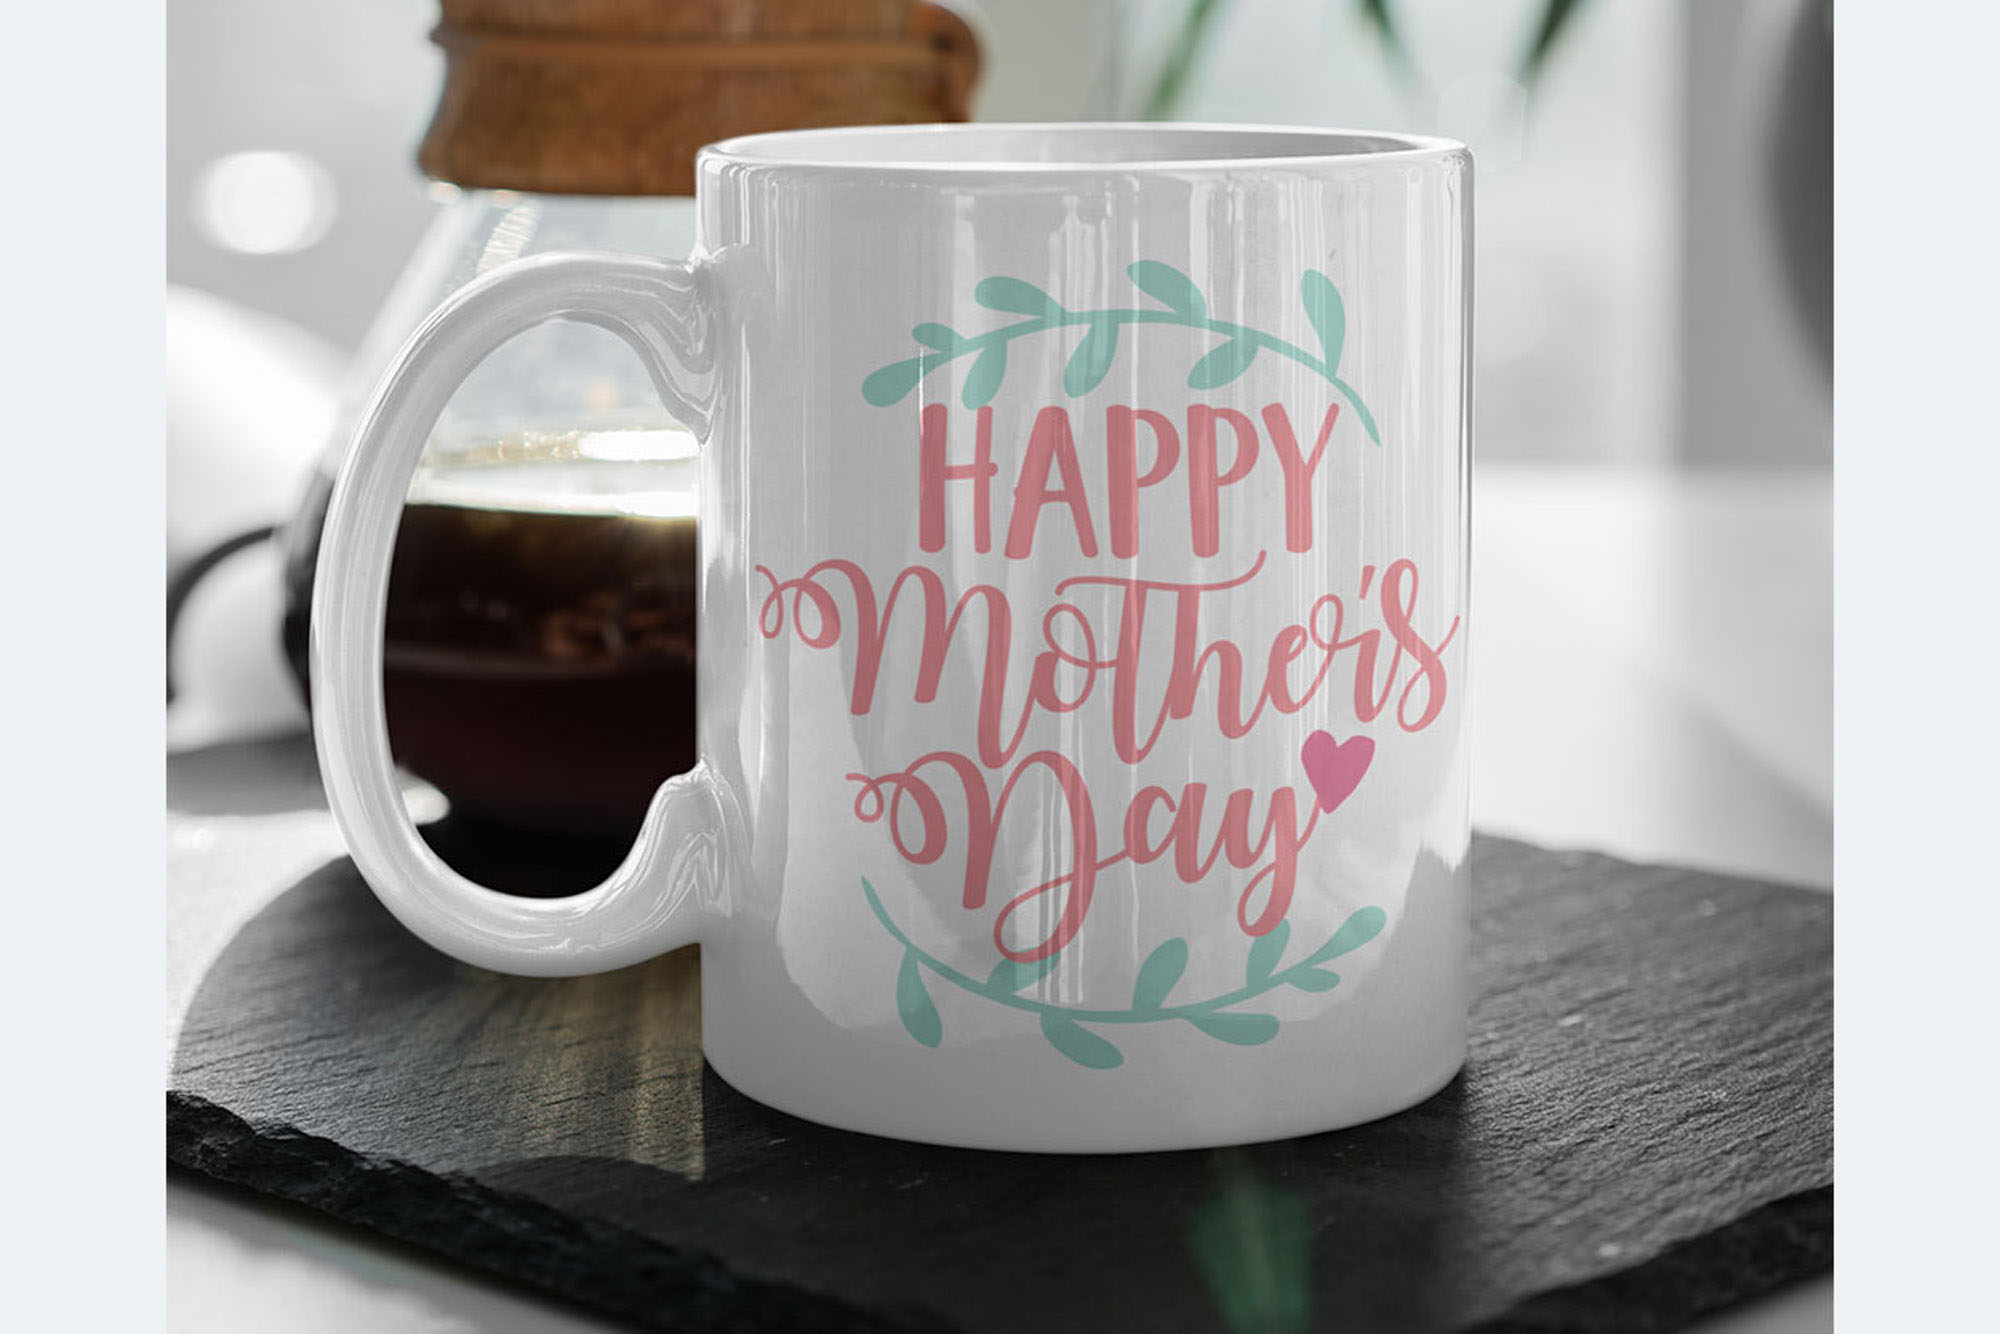 Happy mothers day floral mug